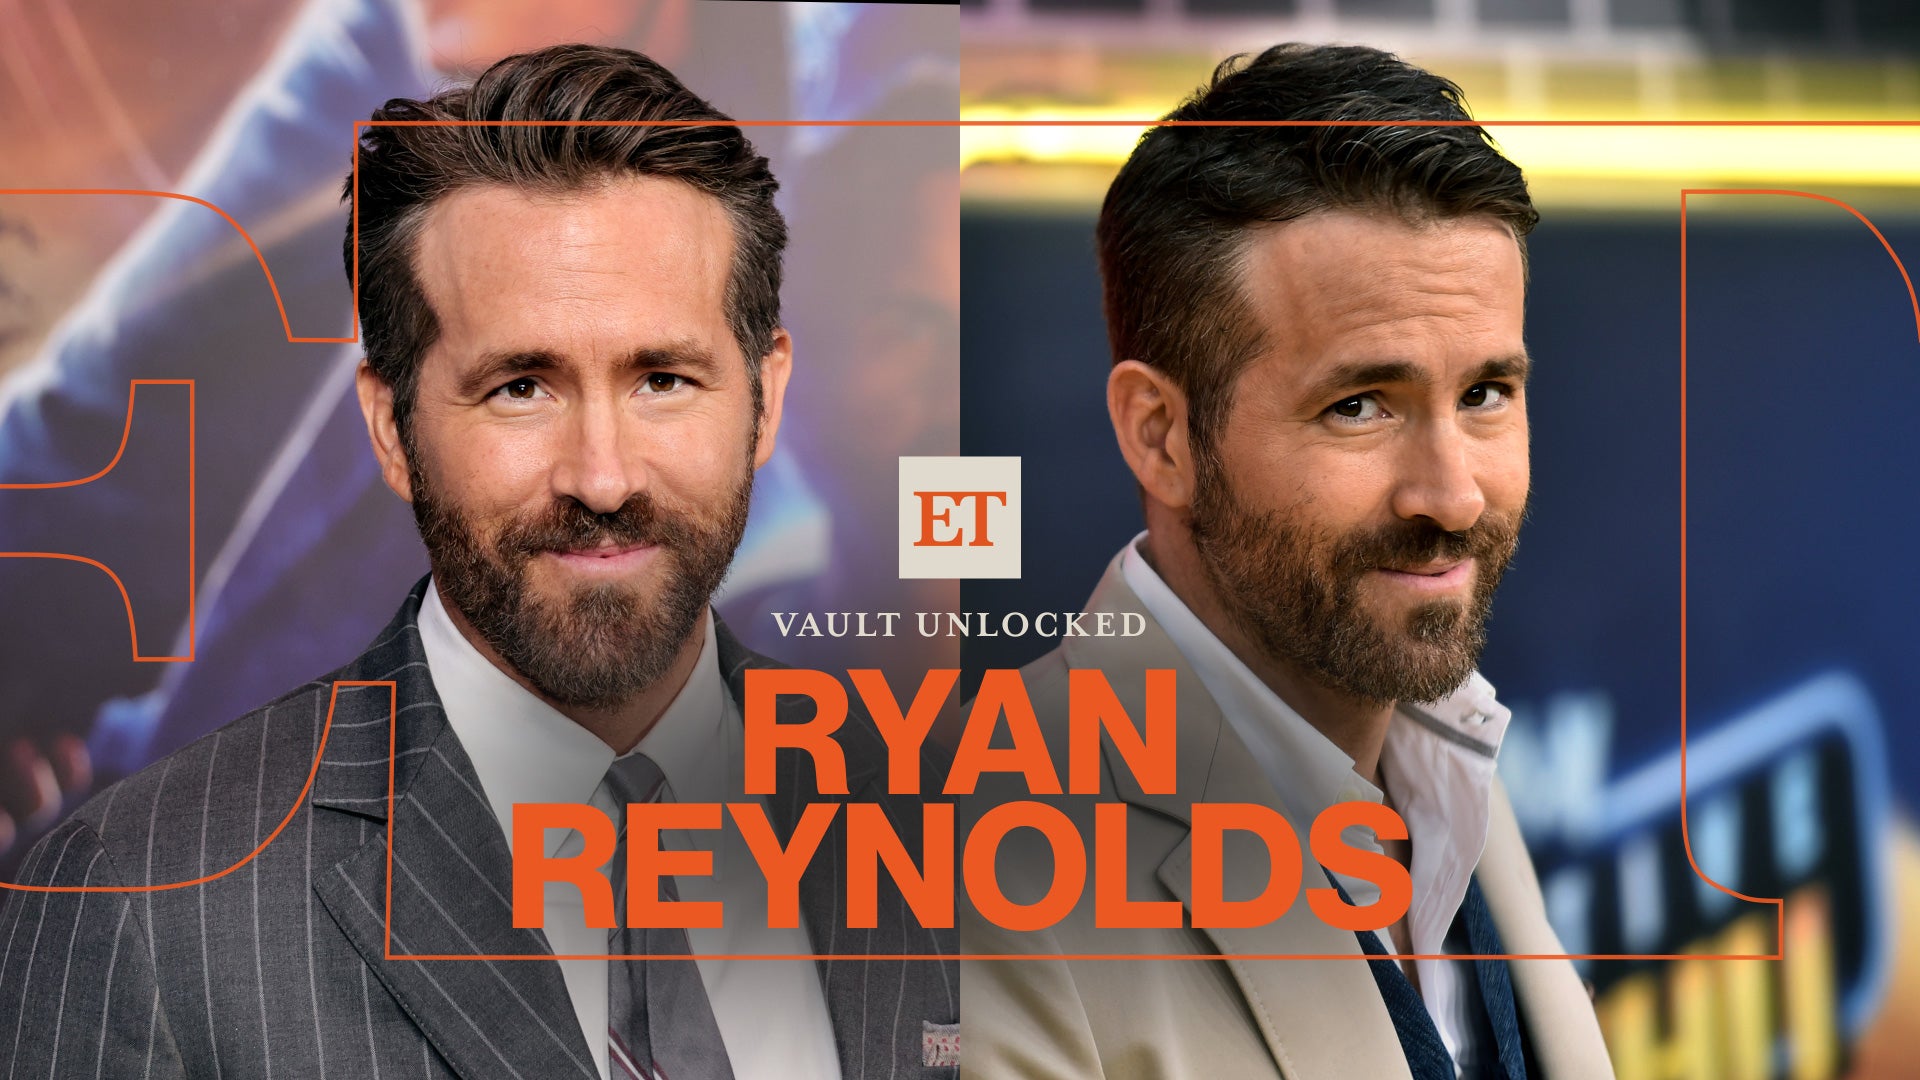 ET Vault Unlocked: Ryan Reynolds | Unseen Interviews From His Action-Packed Career